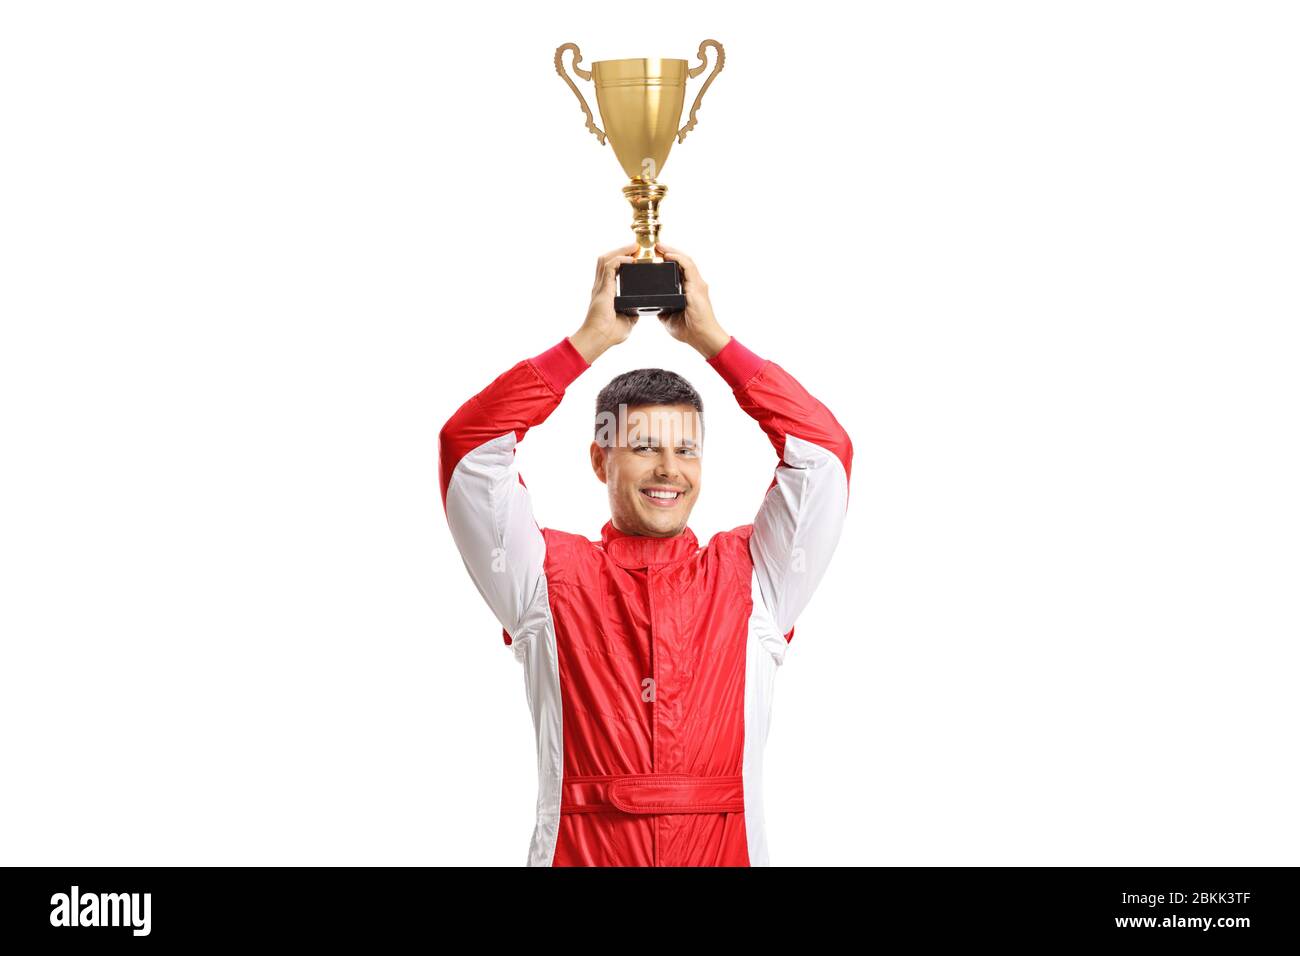 Car racer holding a gold trophy cup and smiling isolated on white background Stock Photo